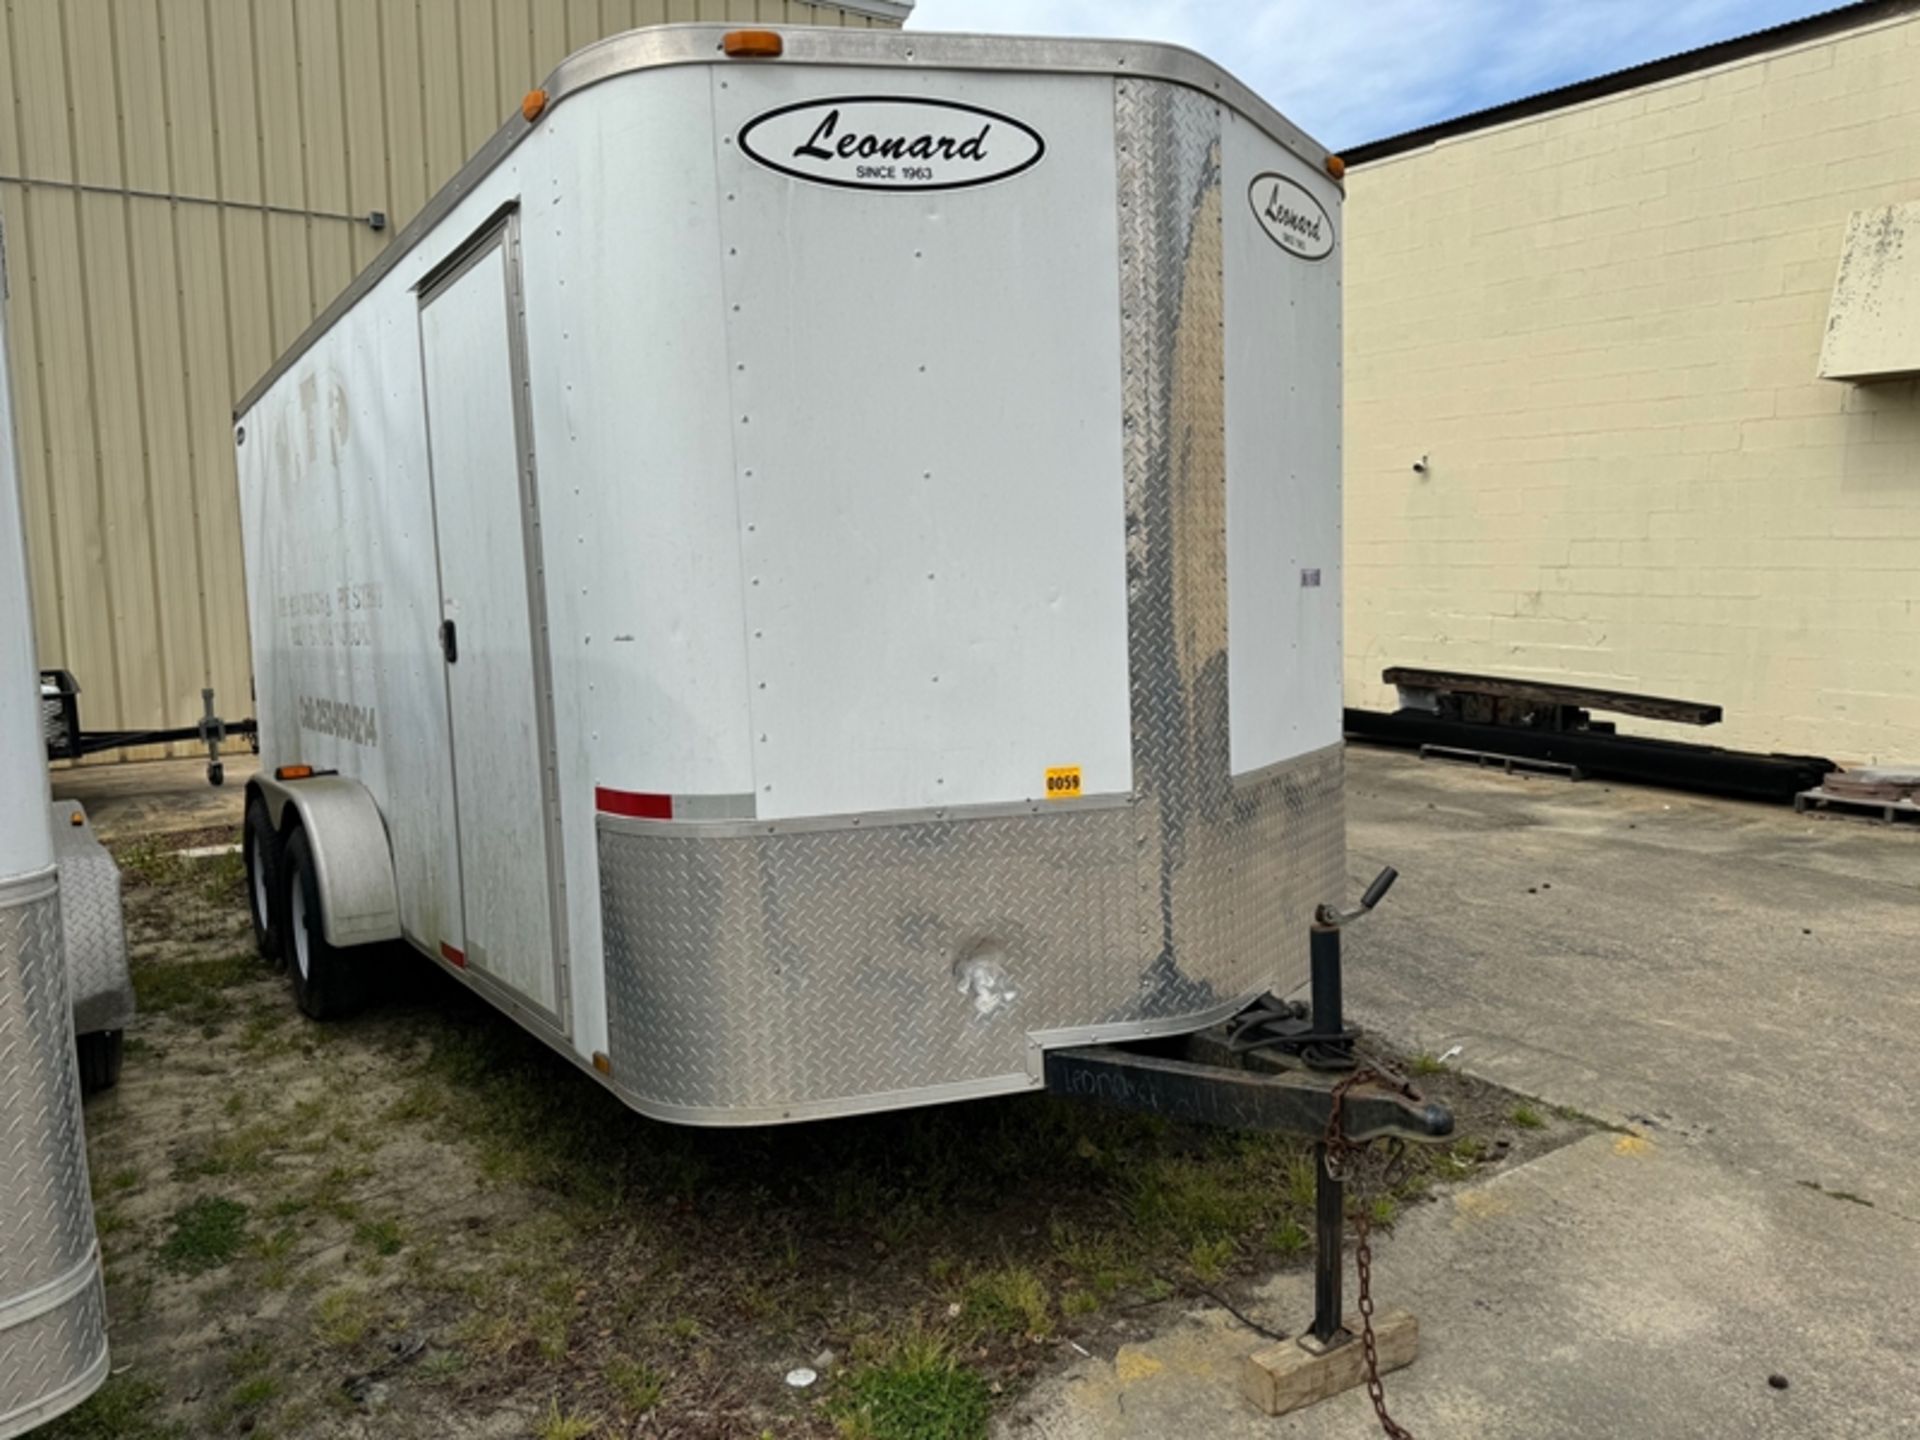 2015 ARISING INDUSTRIES 7'x16' v-nose enclosed trailer - 5YCBE162XFH021727 - Image 2 of 5